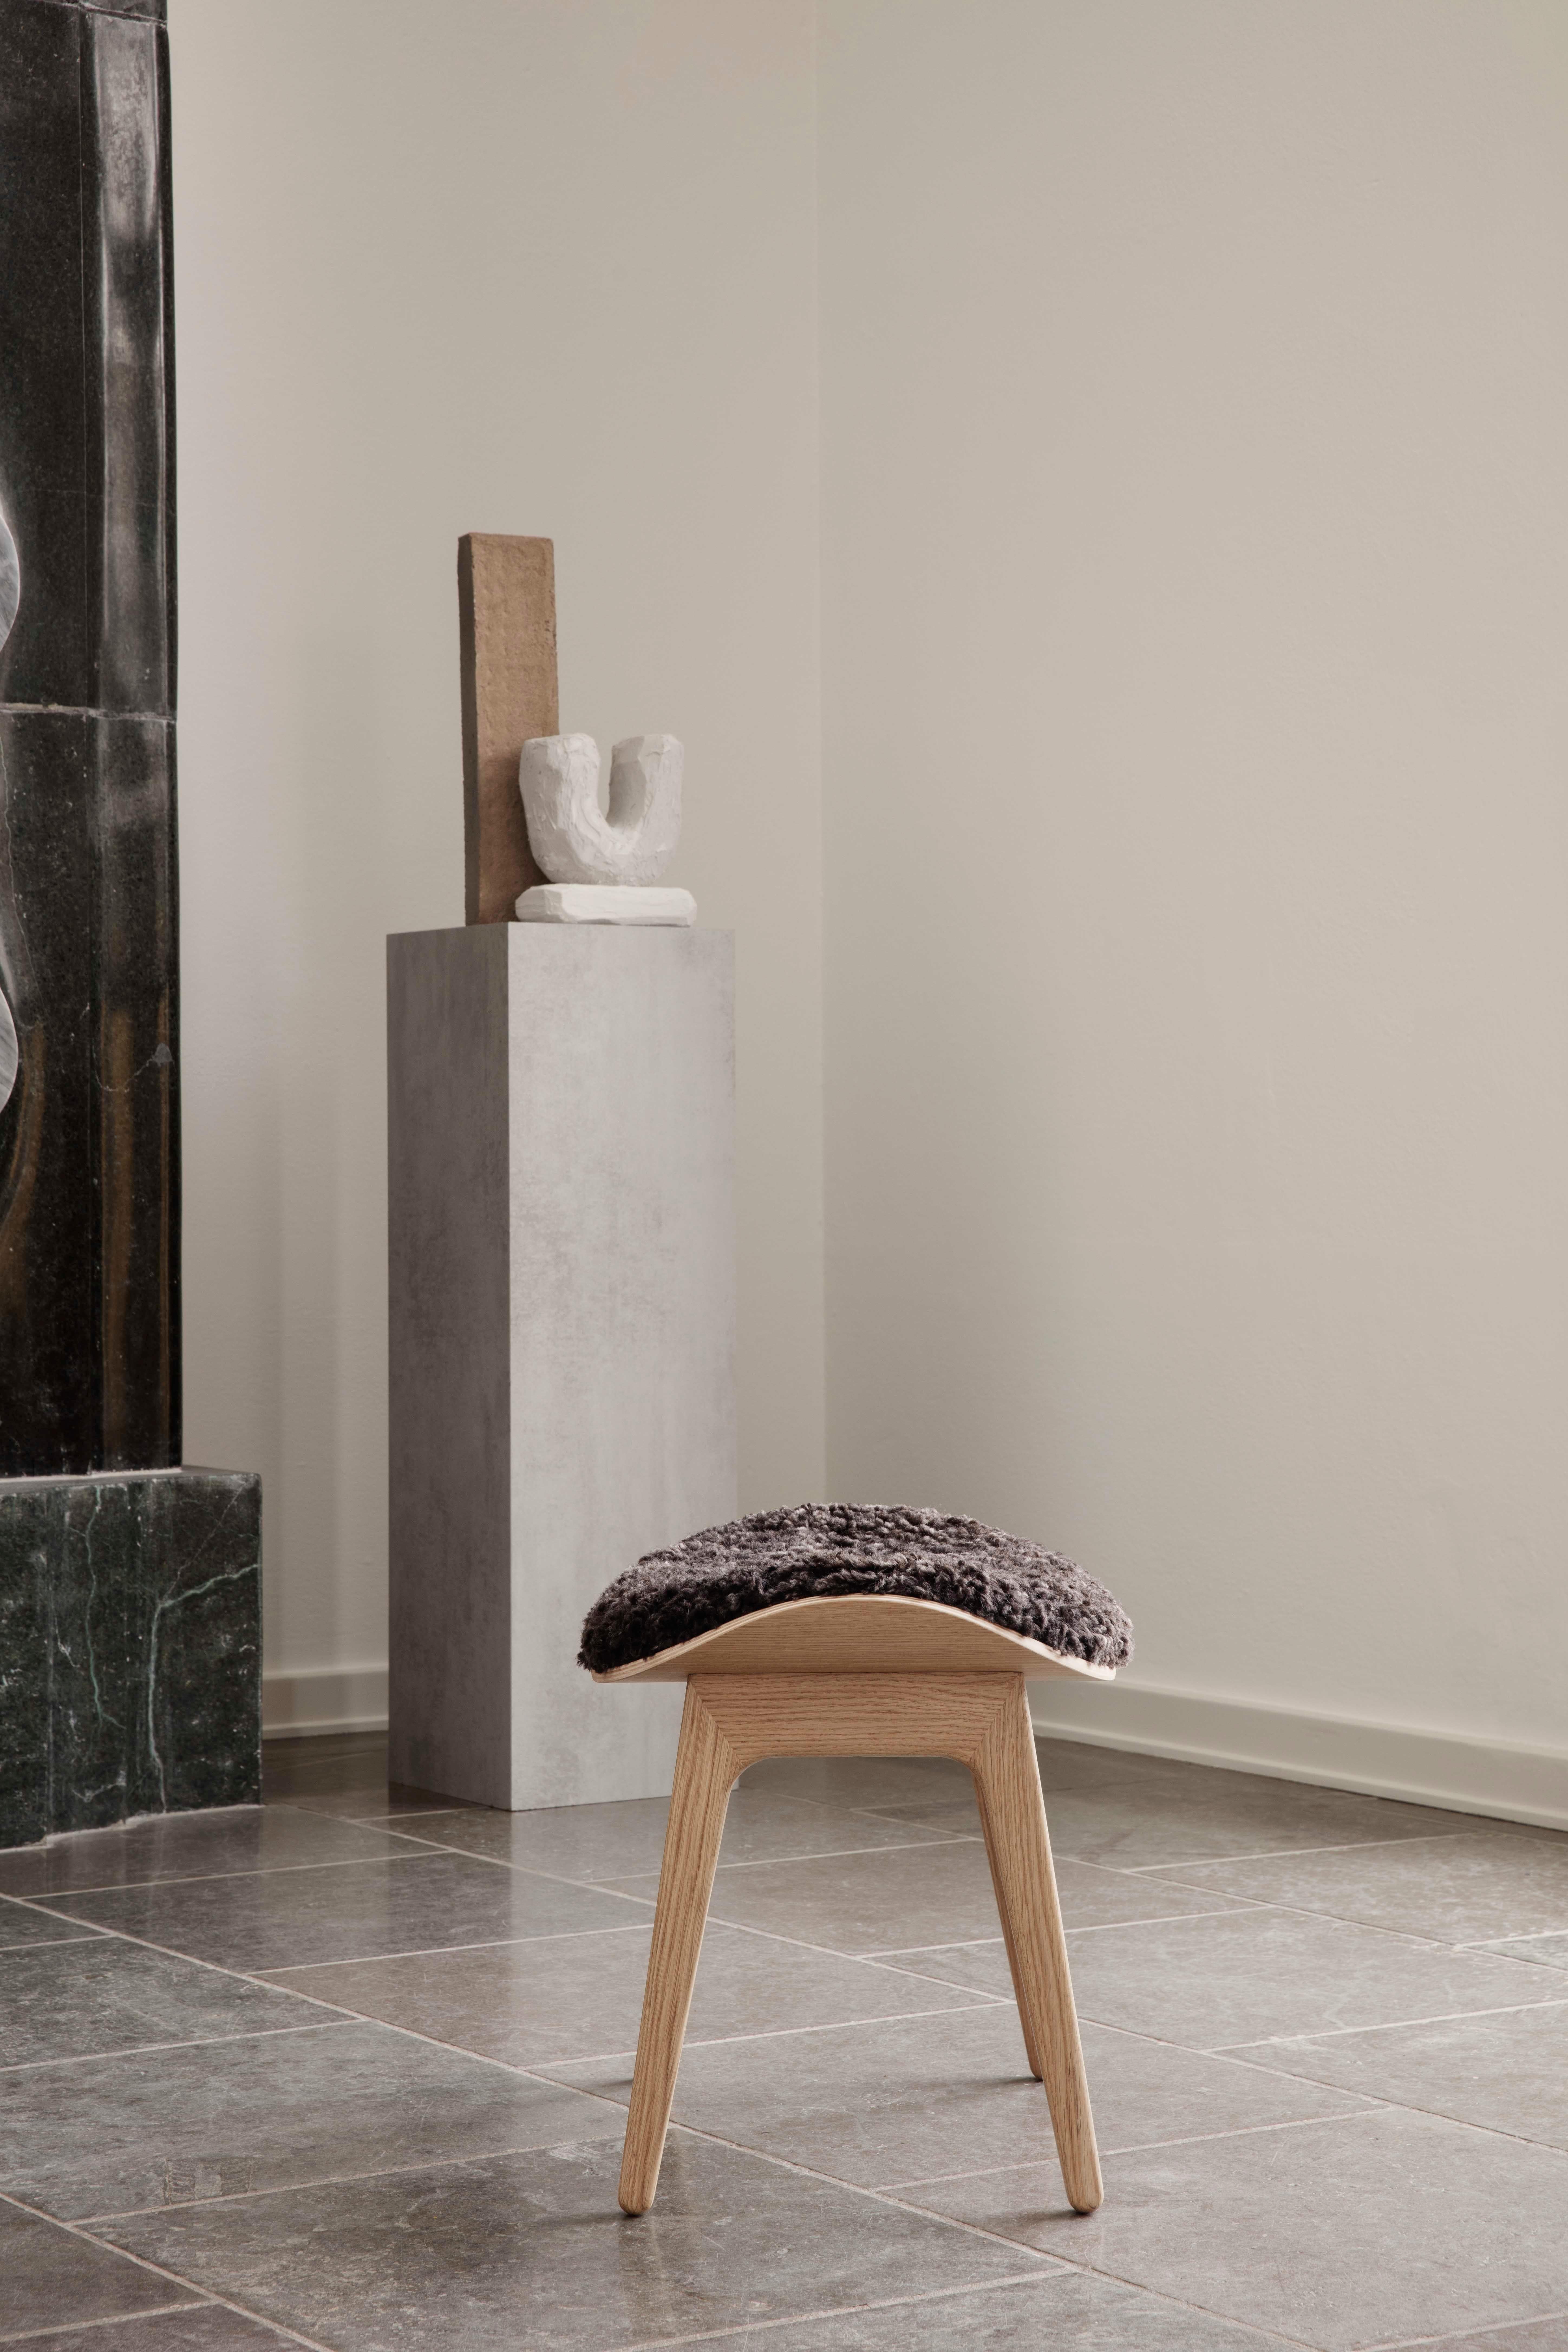 Elephant stool 
Signed by Kristian Sofus Hansen and Tommy Hyldahl for Norr11

Model shown on the picture:
Wood: Natural Oak
Fabric: Sheepskin Espresso
Dimensions: H. 39 x 57 x 41 cm

Wood types available: natural oak / light smoked oak / dark smoked